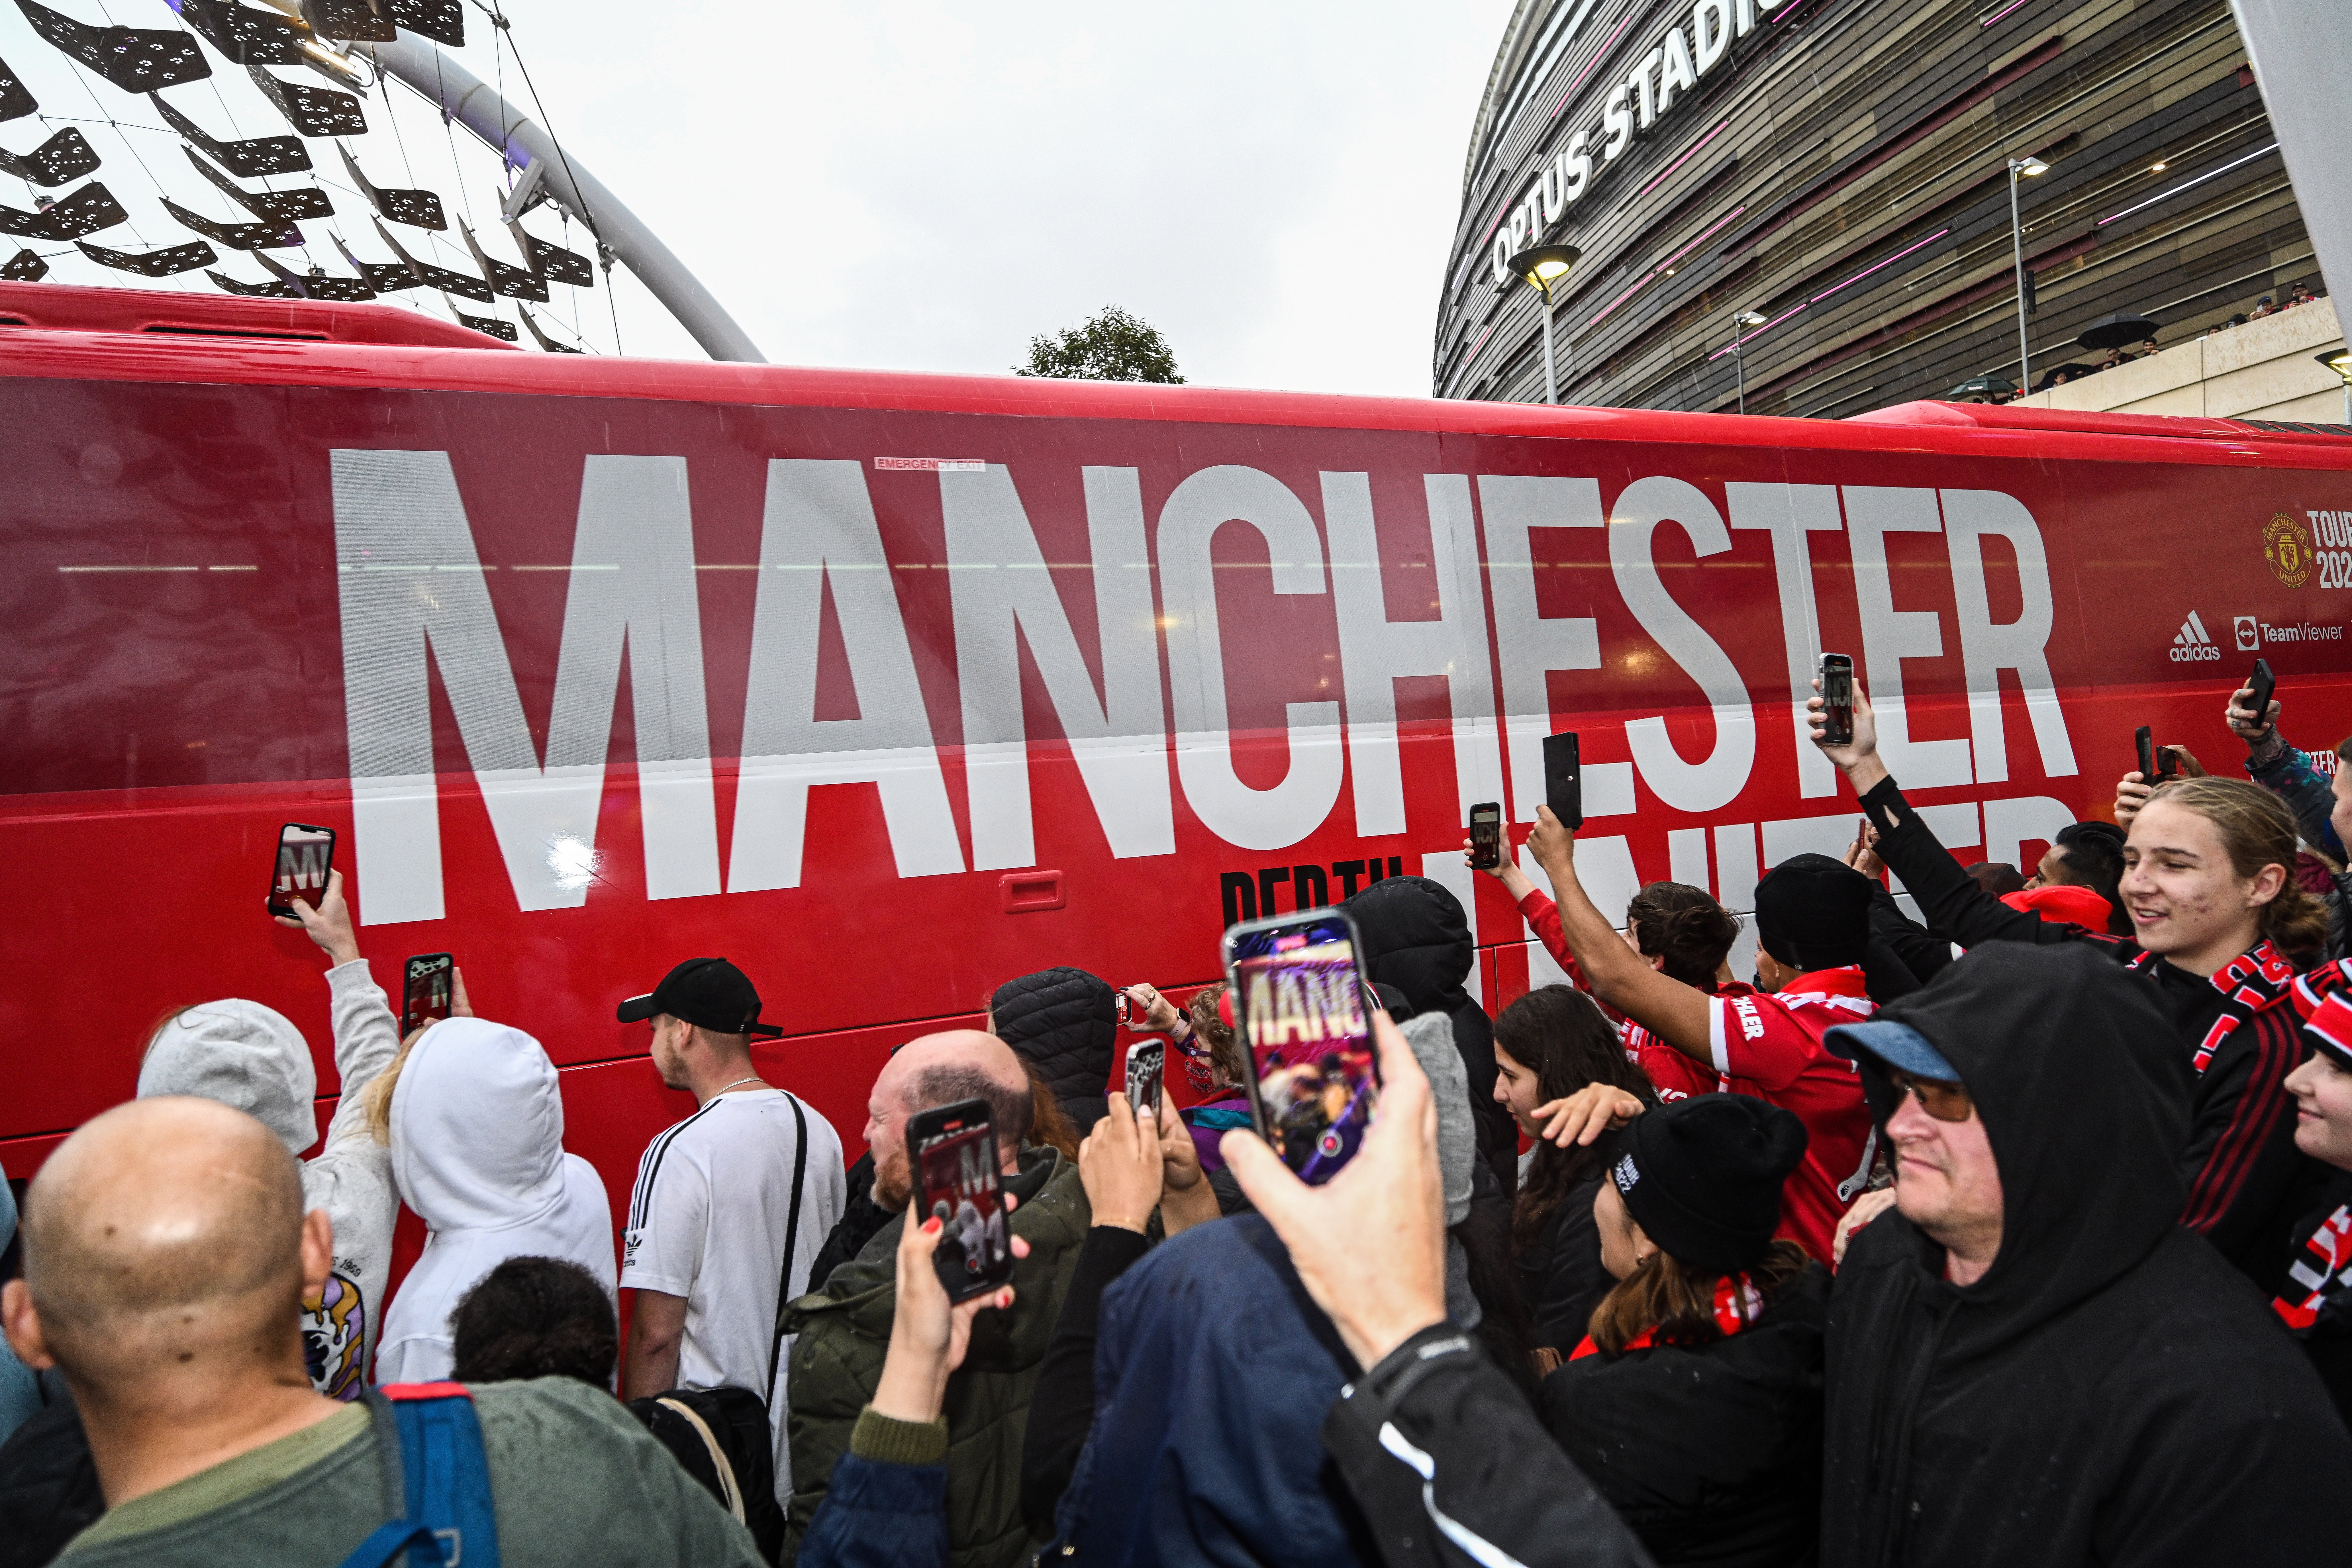 A YouTube prankster managed to sneak onto the Manchester United team bus